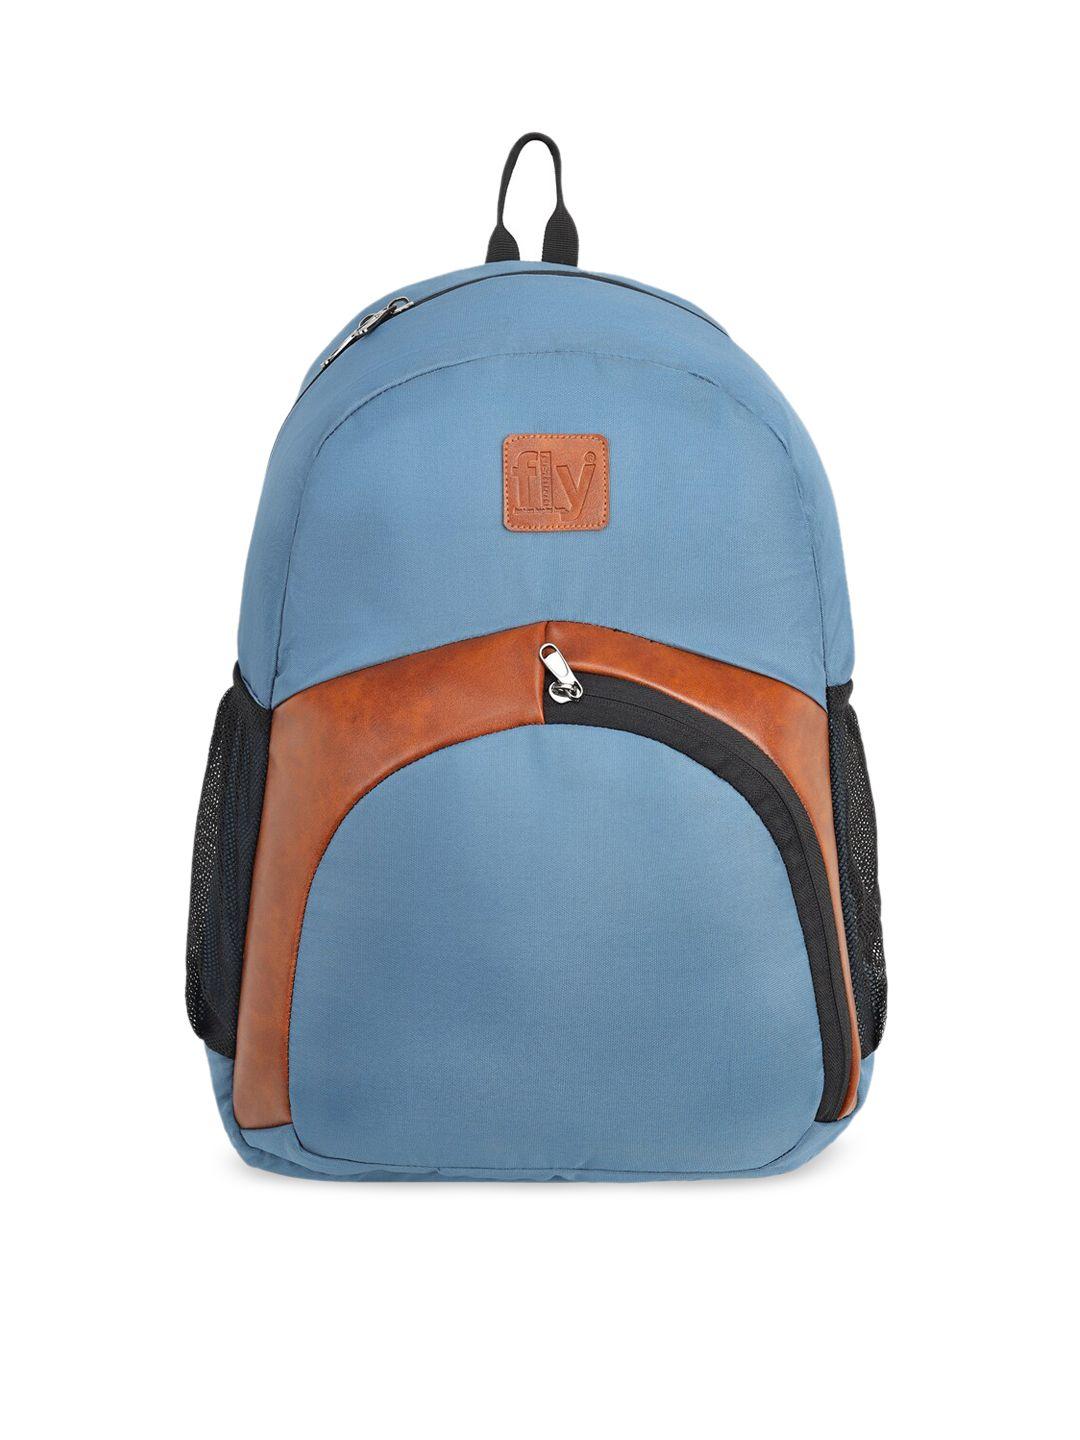 fly fashion unisex blue solid backpack